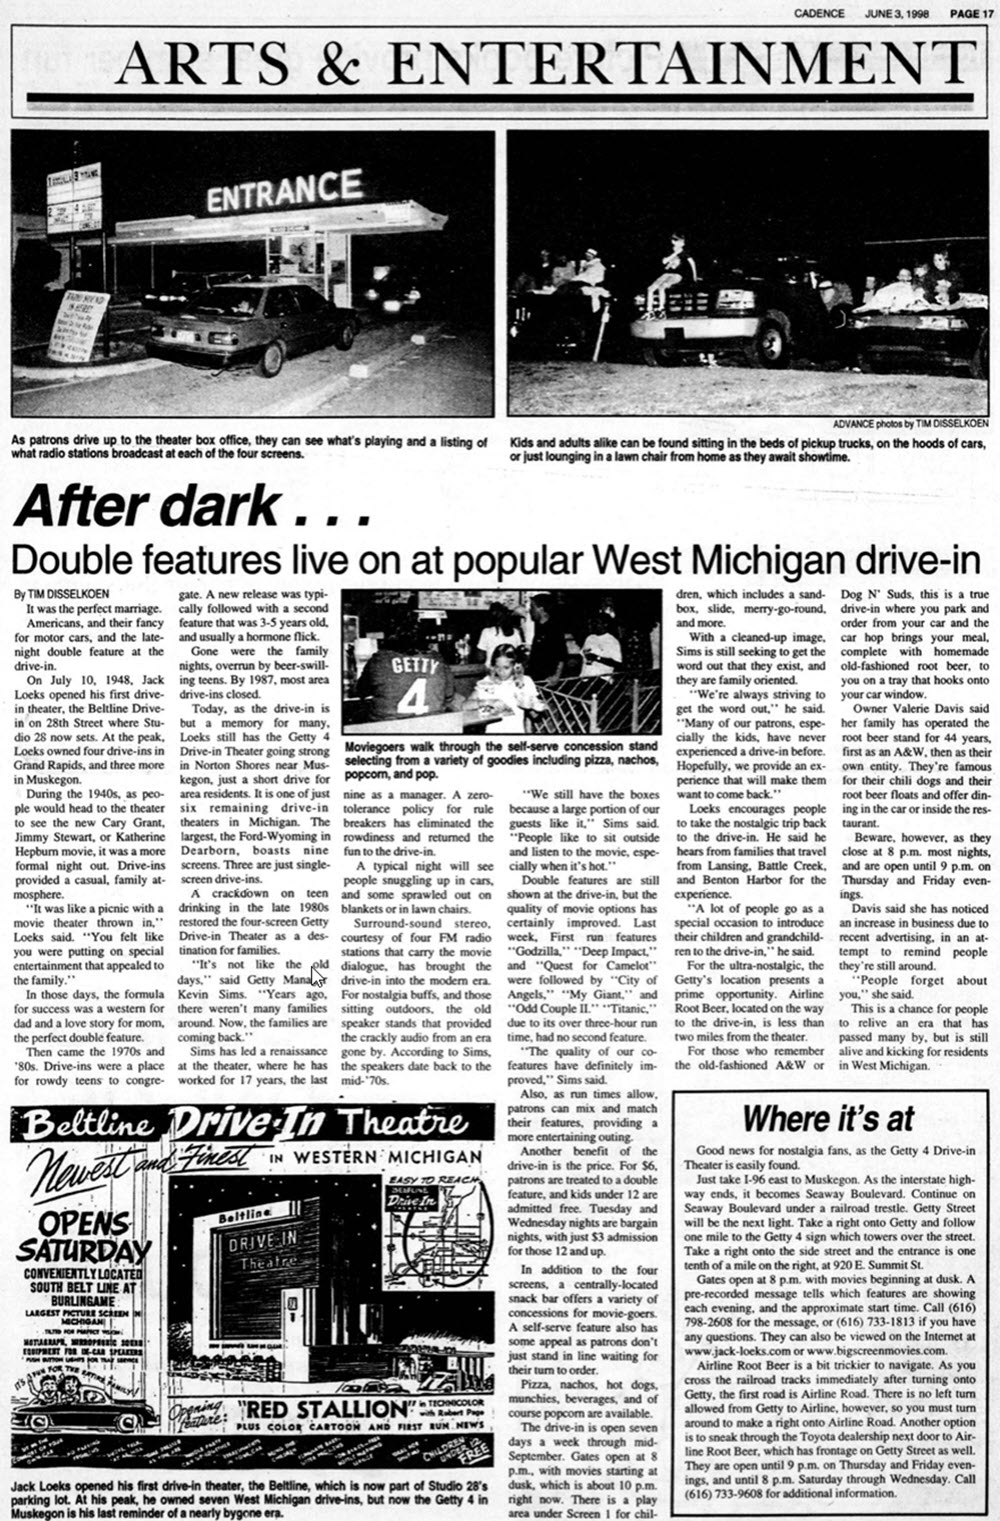 june 1998 article Getty 4 Drive-In Theatre, Muskegon